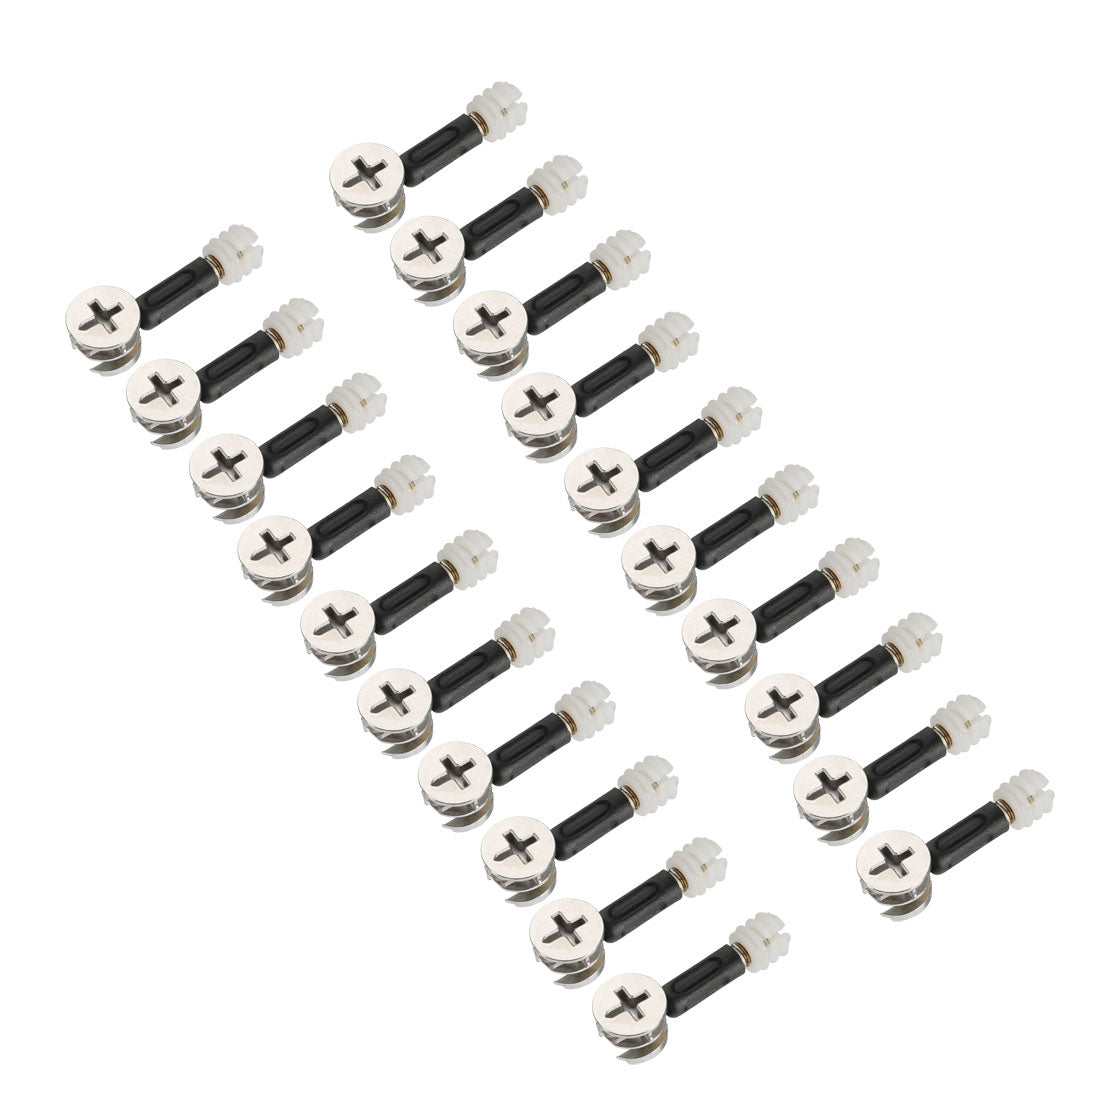 uxcell Uxcell 20 Sets Furniture Connecting 15mm OD Cam Fitting w Dowel Screws Pre-inserted Nut